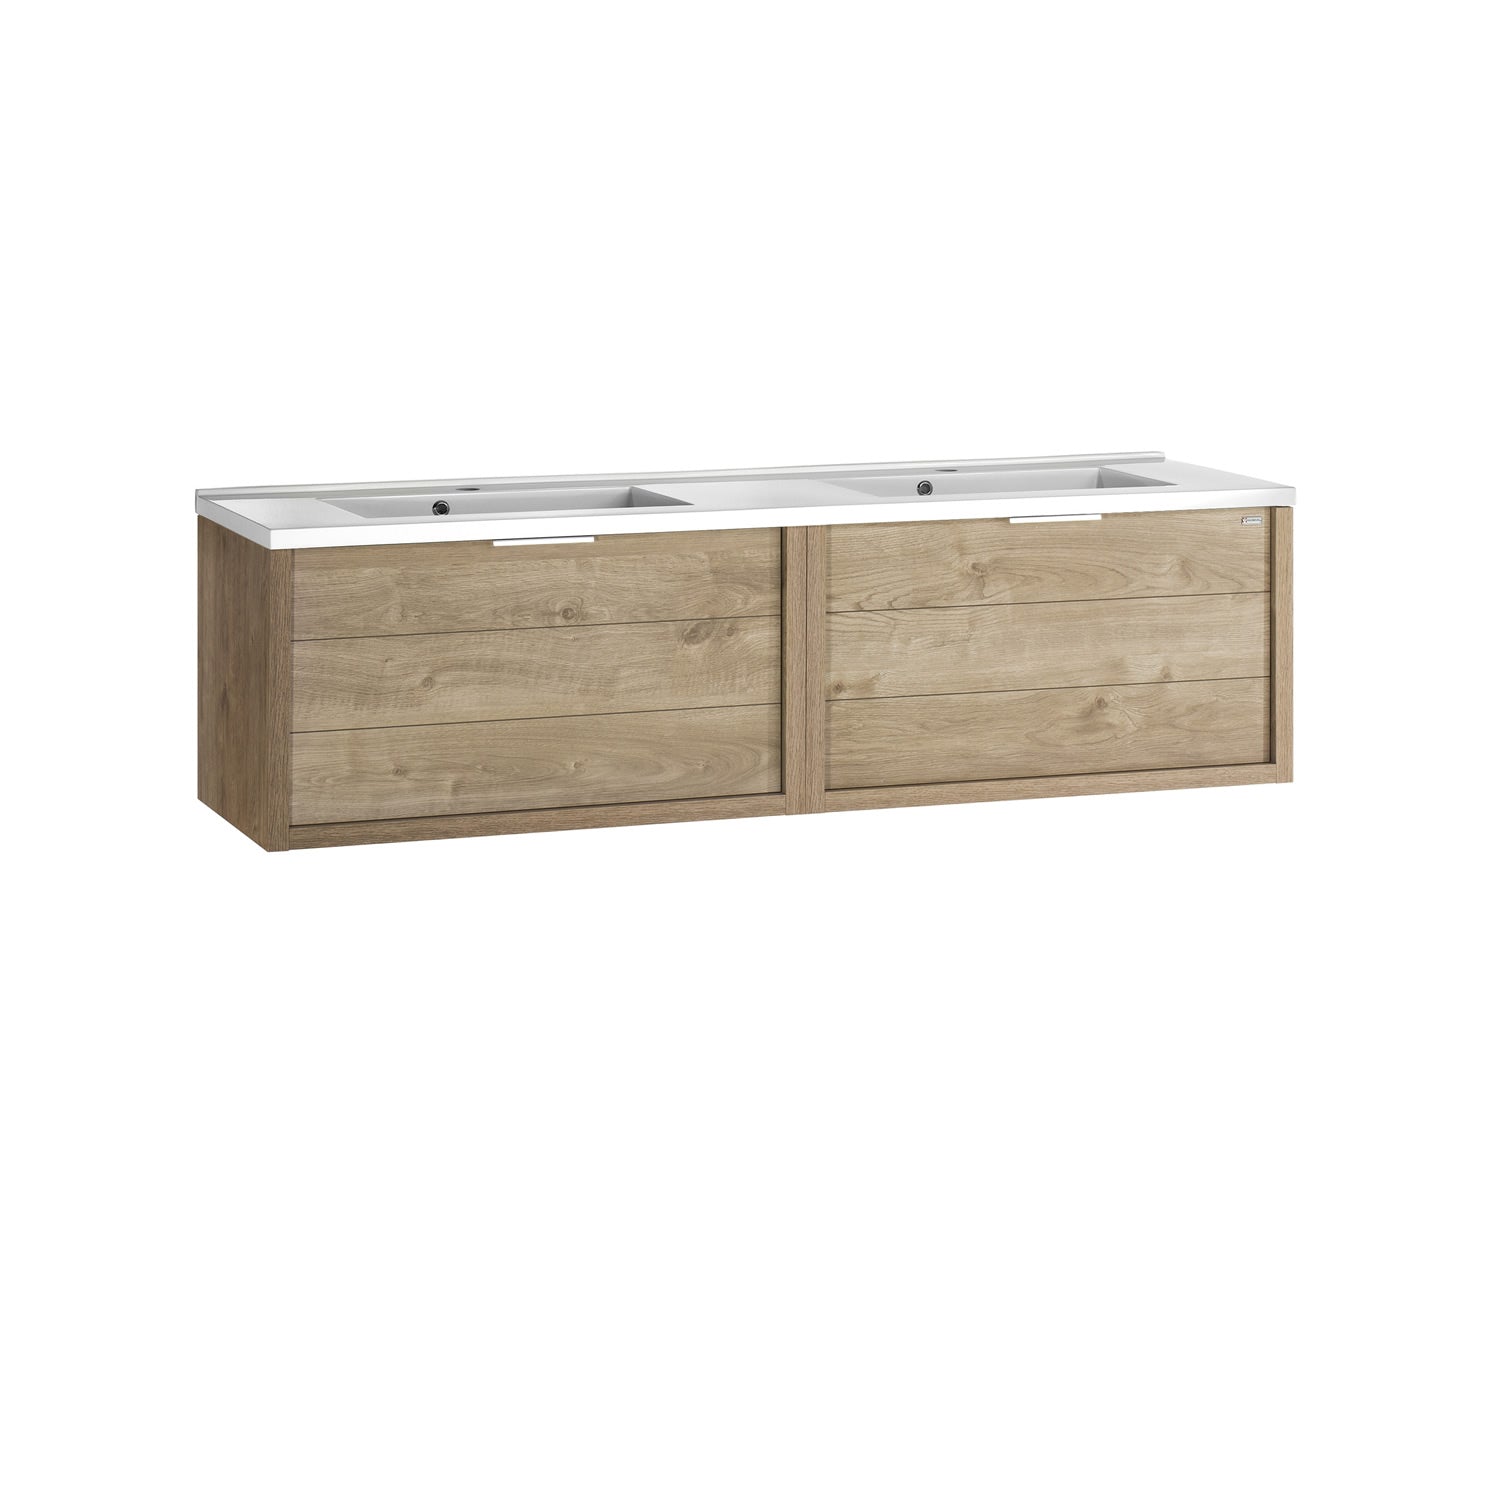 48" Double Vanity, Wall Mount, 2 Drawers with Soft Close, Oak, Serie Tino by VALENZUELA